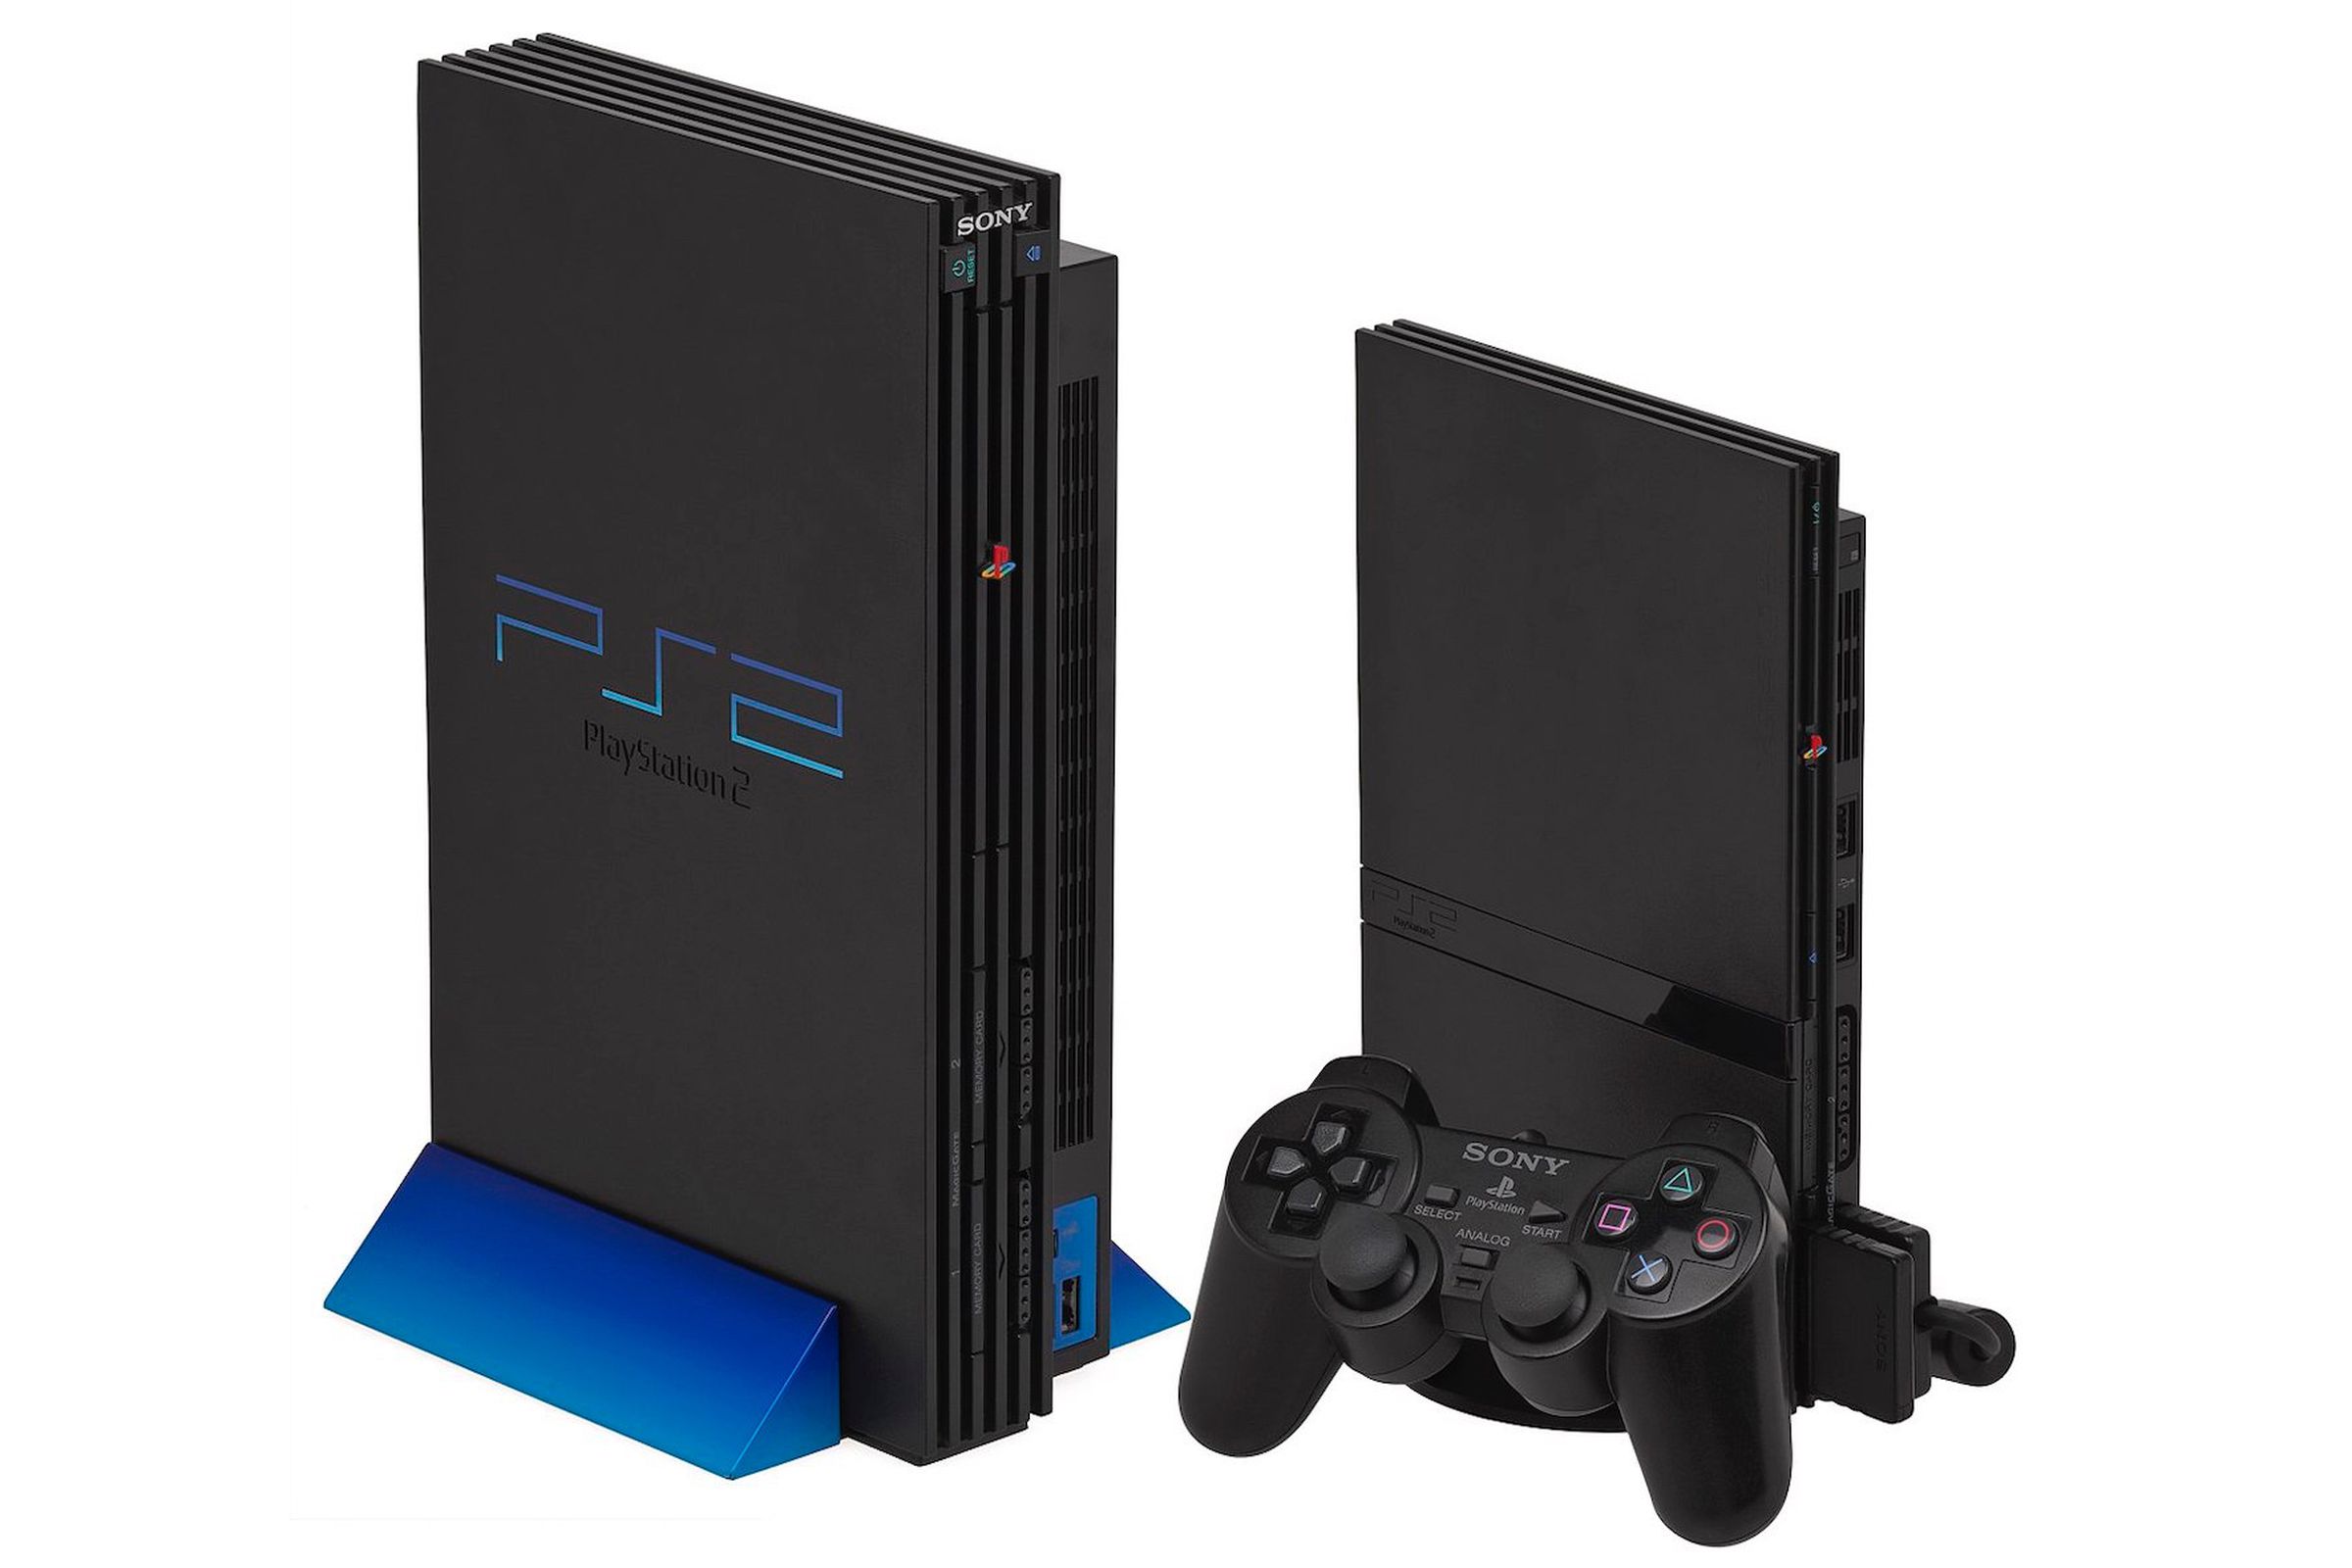 The original PlayStation 2 and its slim revision.